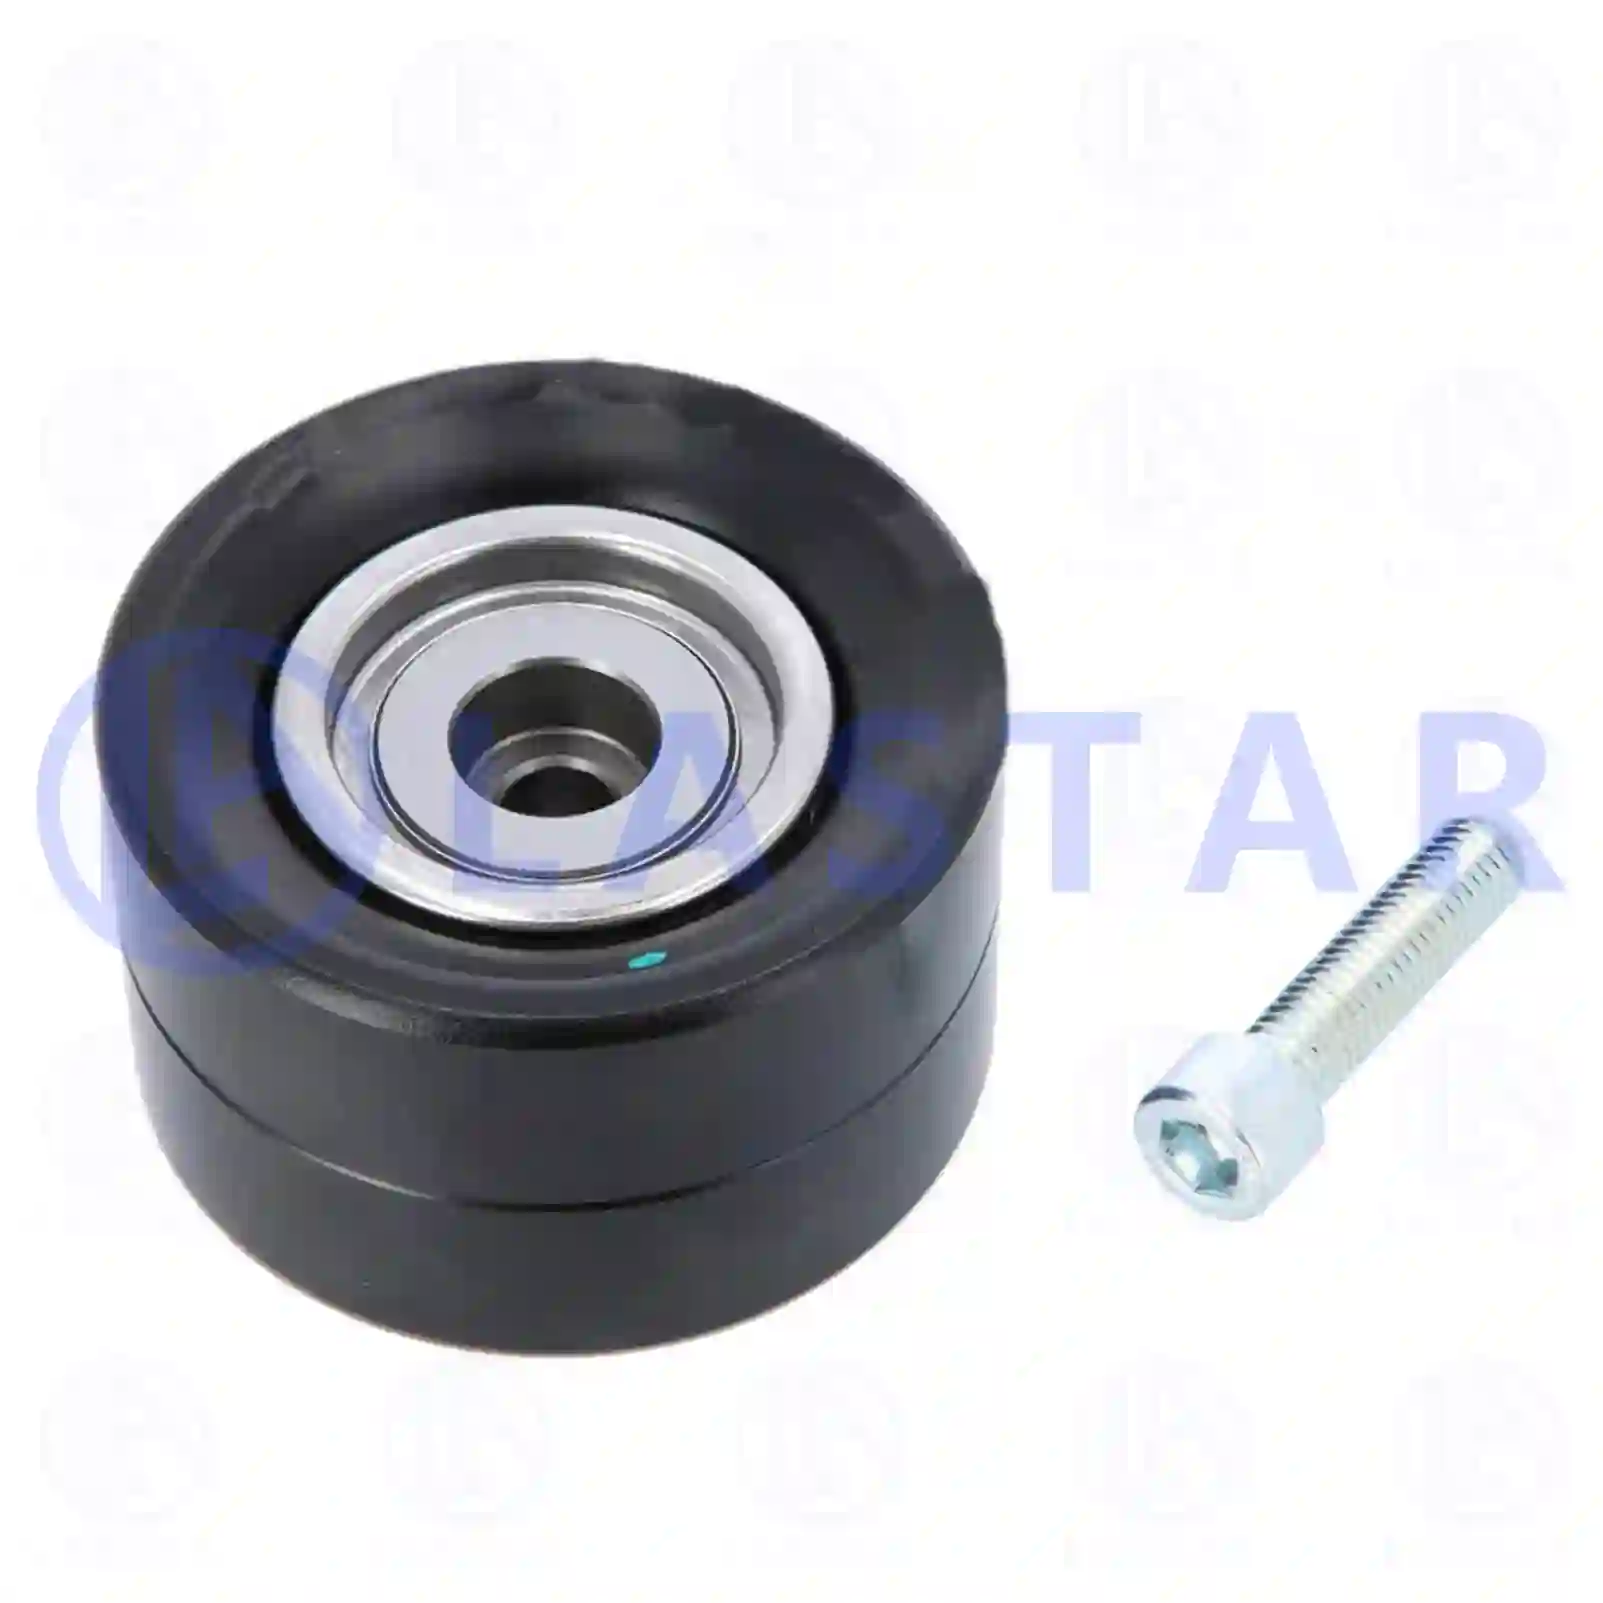  Tension roller, with screw || Lastar Spare Part | Truck Spare Parts, Auotomotive Spare Parts